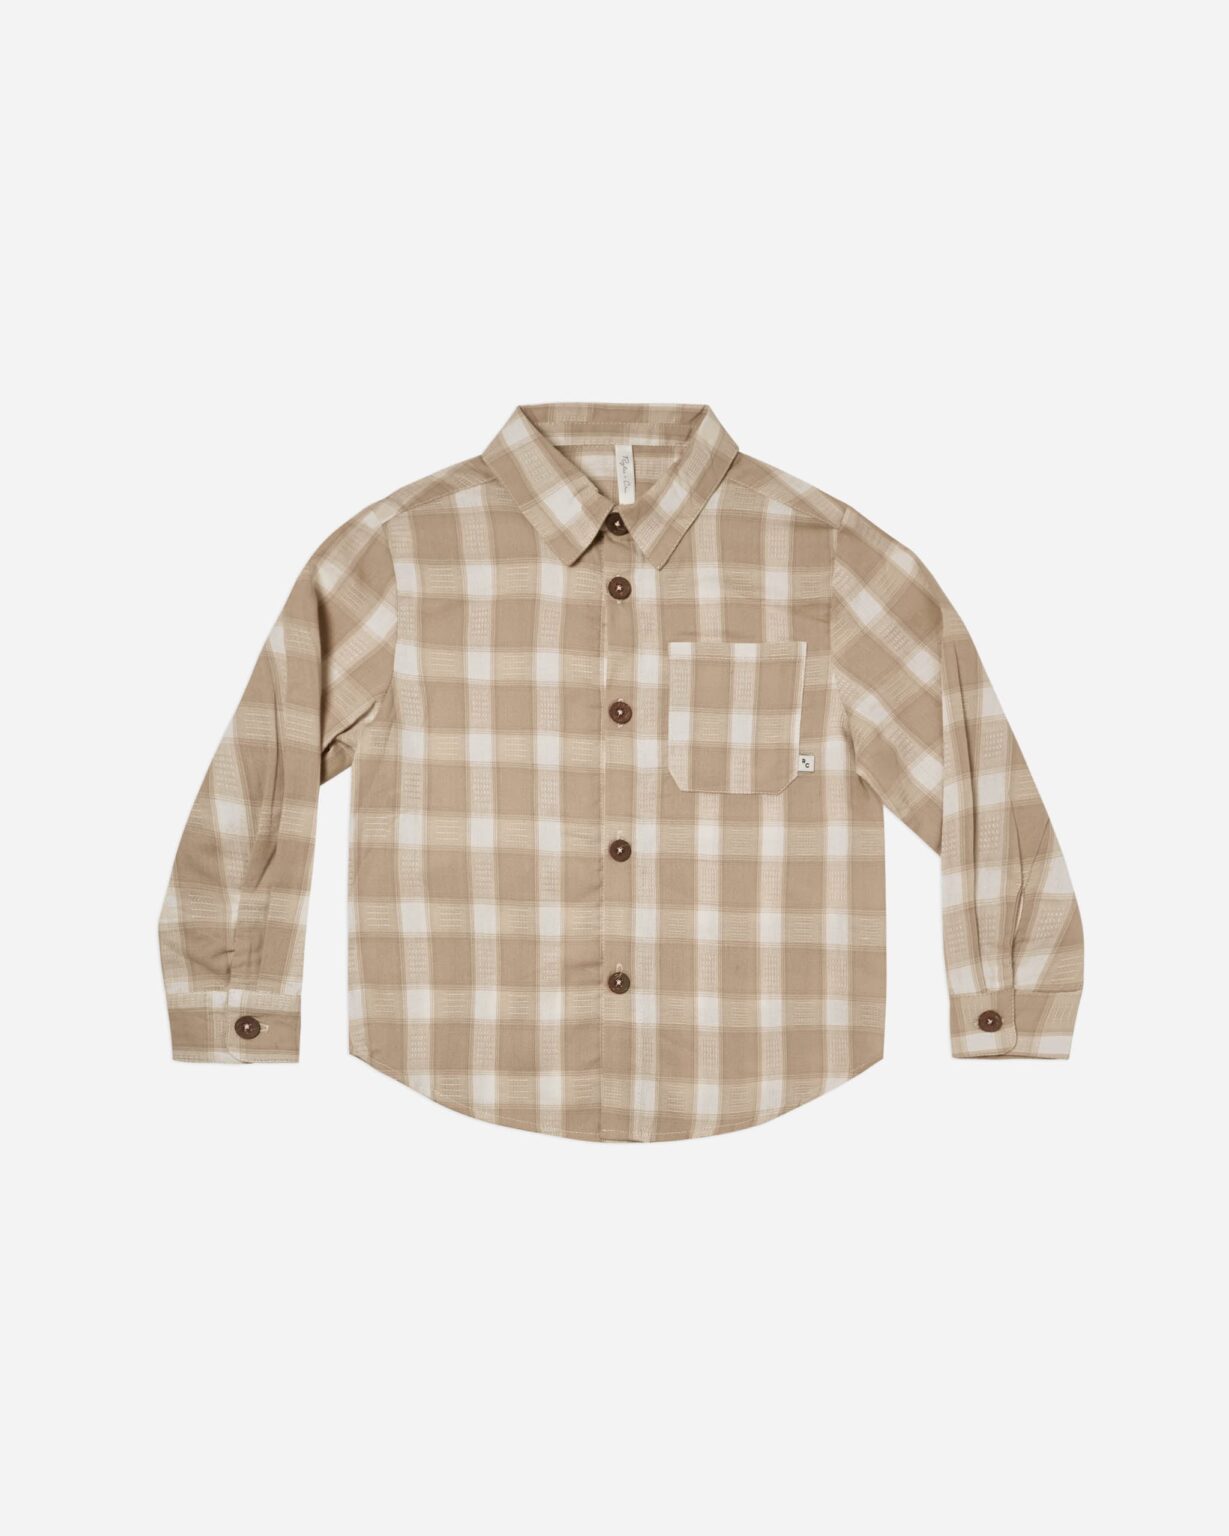 Collared Long Sleeve Shirt In Putty Plaid from Rylee + Cru